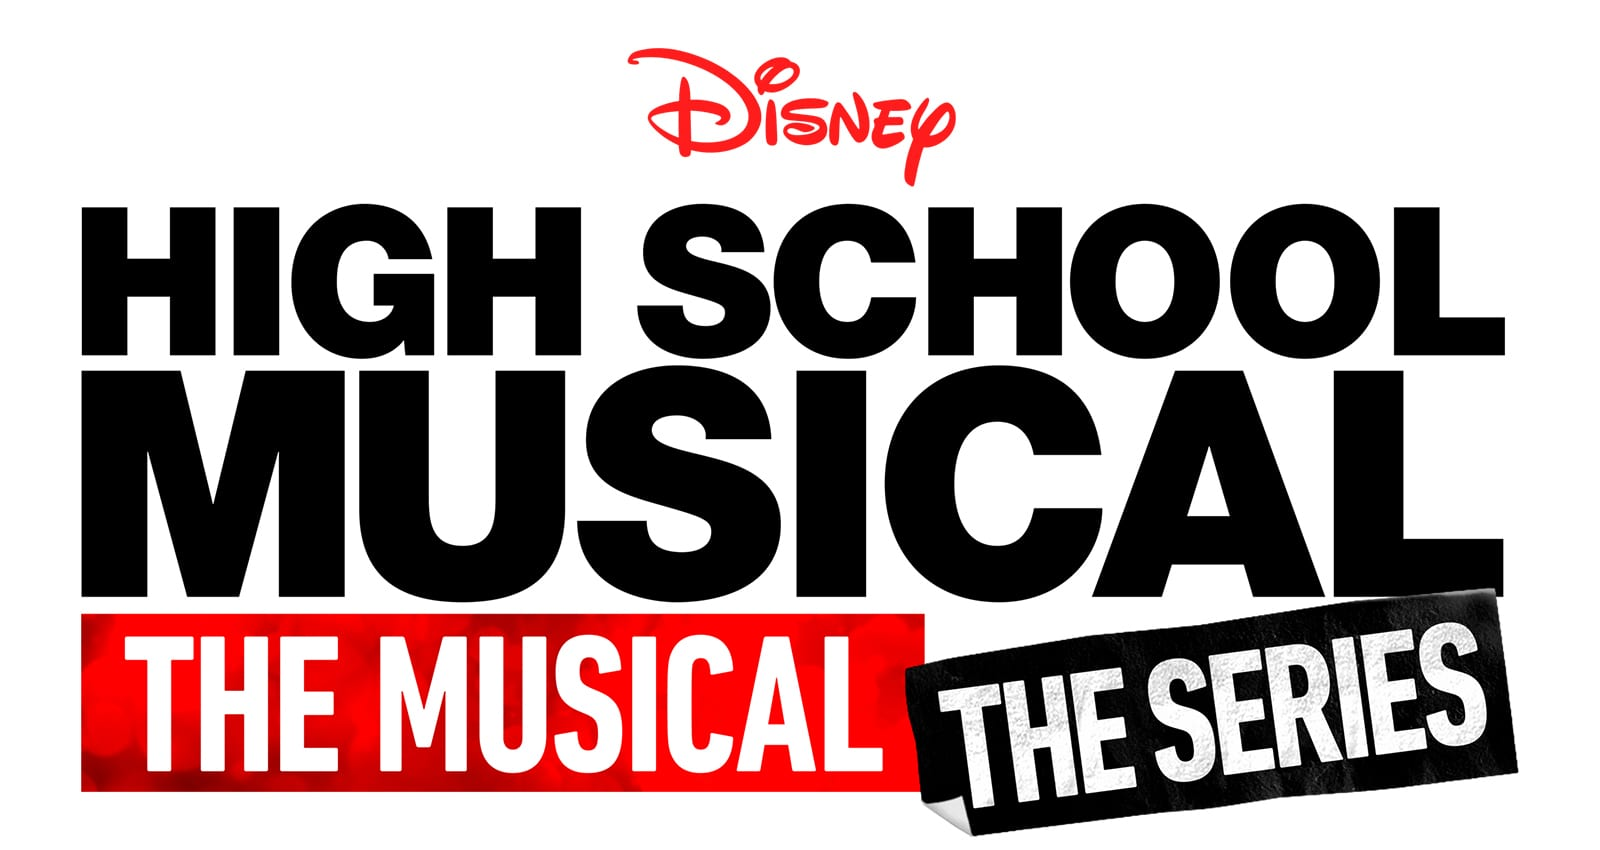 hsm the musical the series logof1572964217